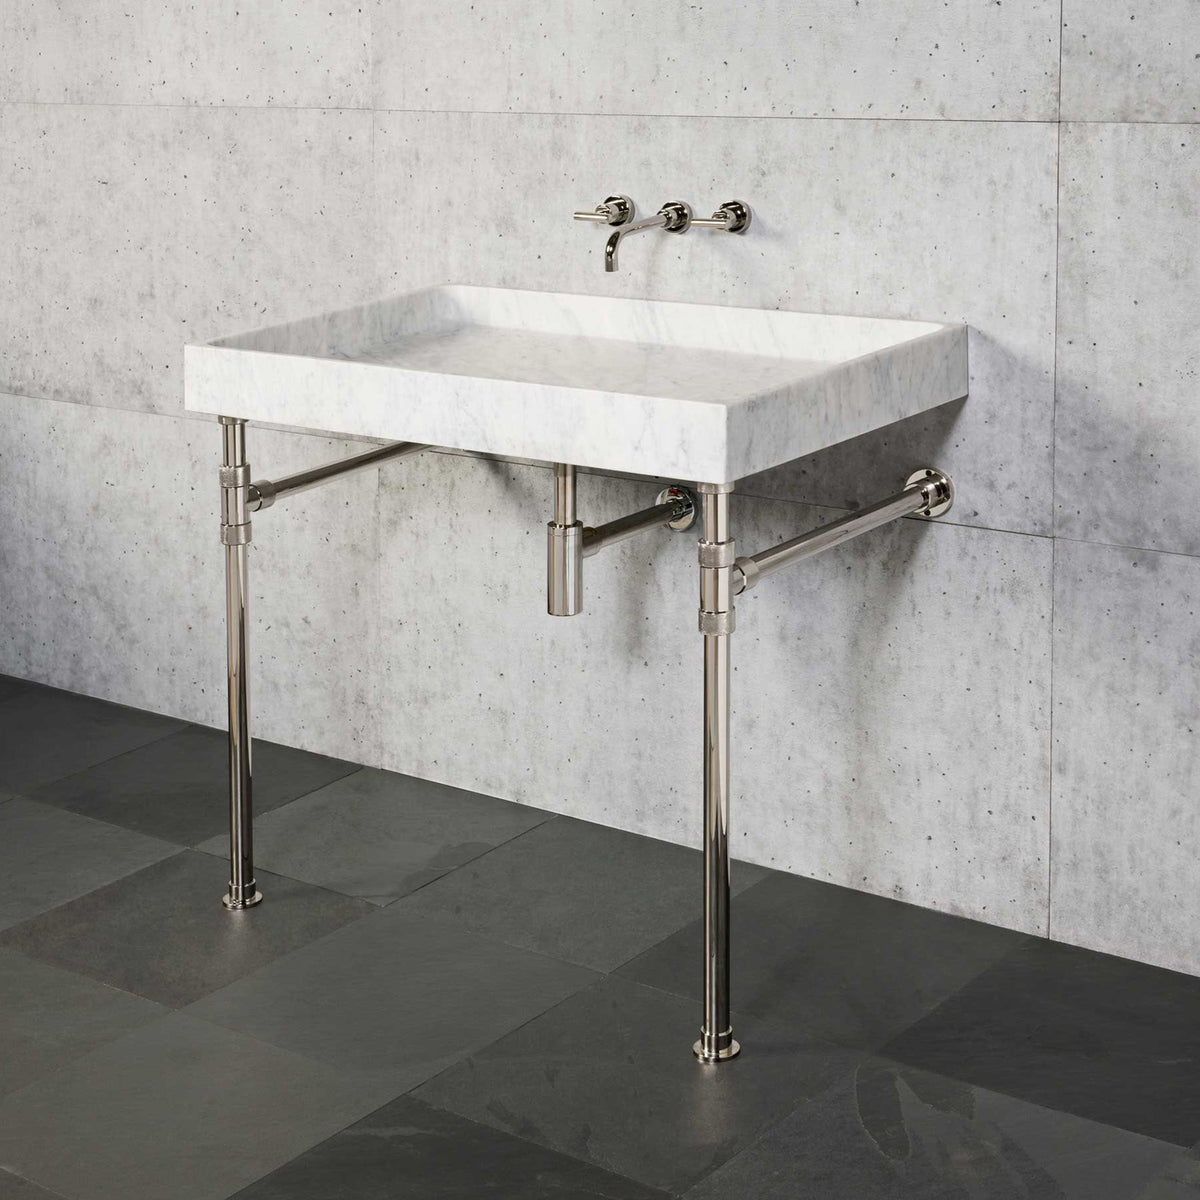 Ventus Bath Sink in carrara marble paired with Elemental Classic Vanity Legs in polished nickel image 1 of 4